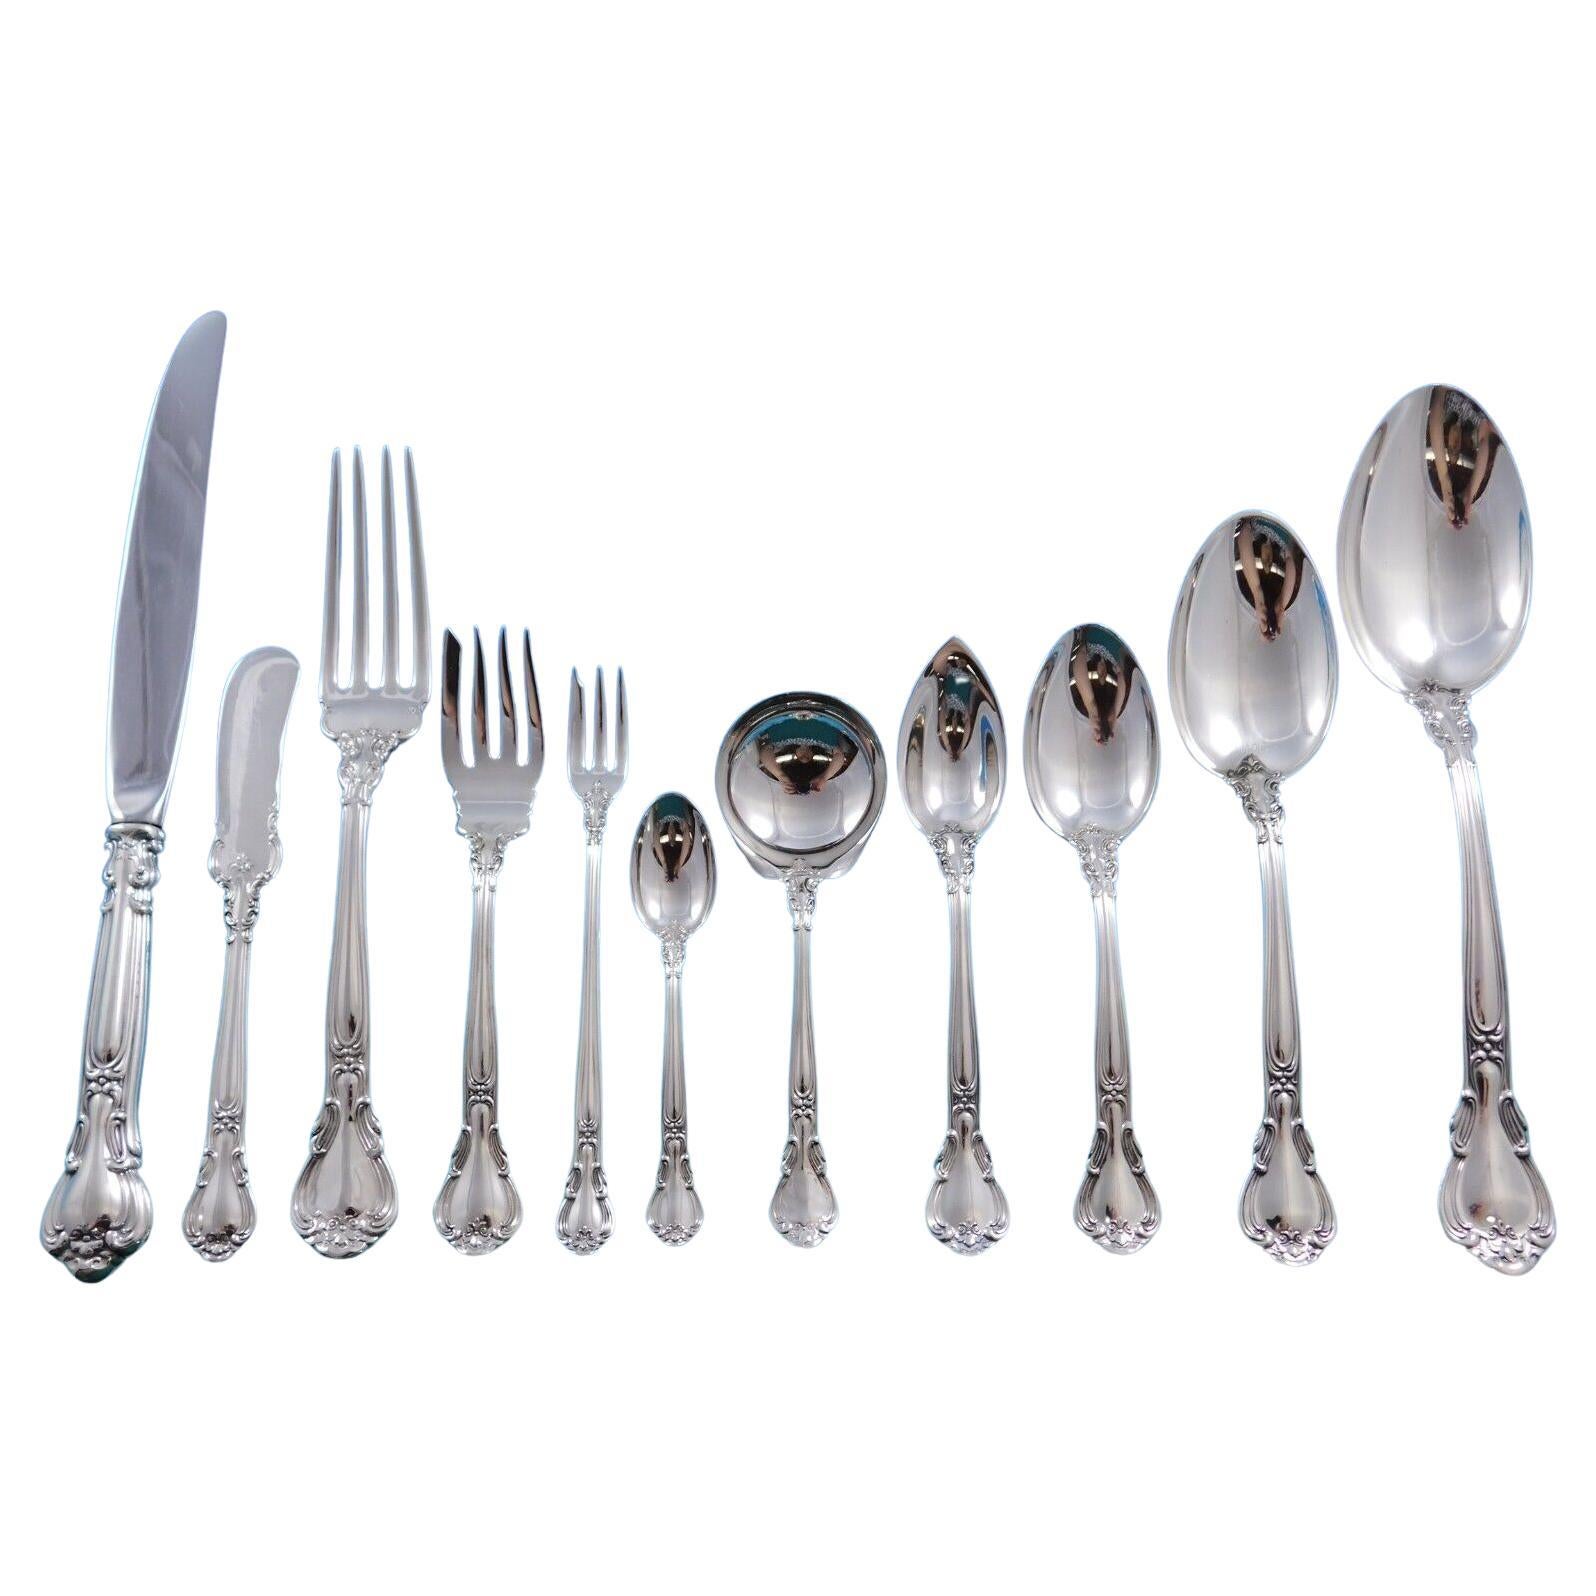 Chantilly by Gorham Sterling Silver Flatware Set for 12 Service 132 Pc Dinner XL